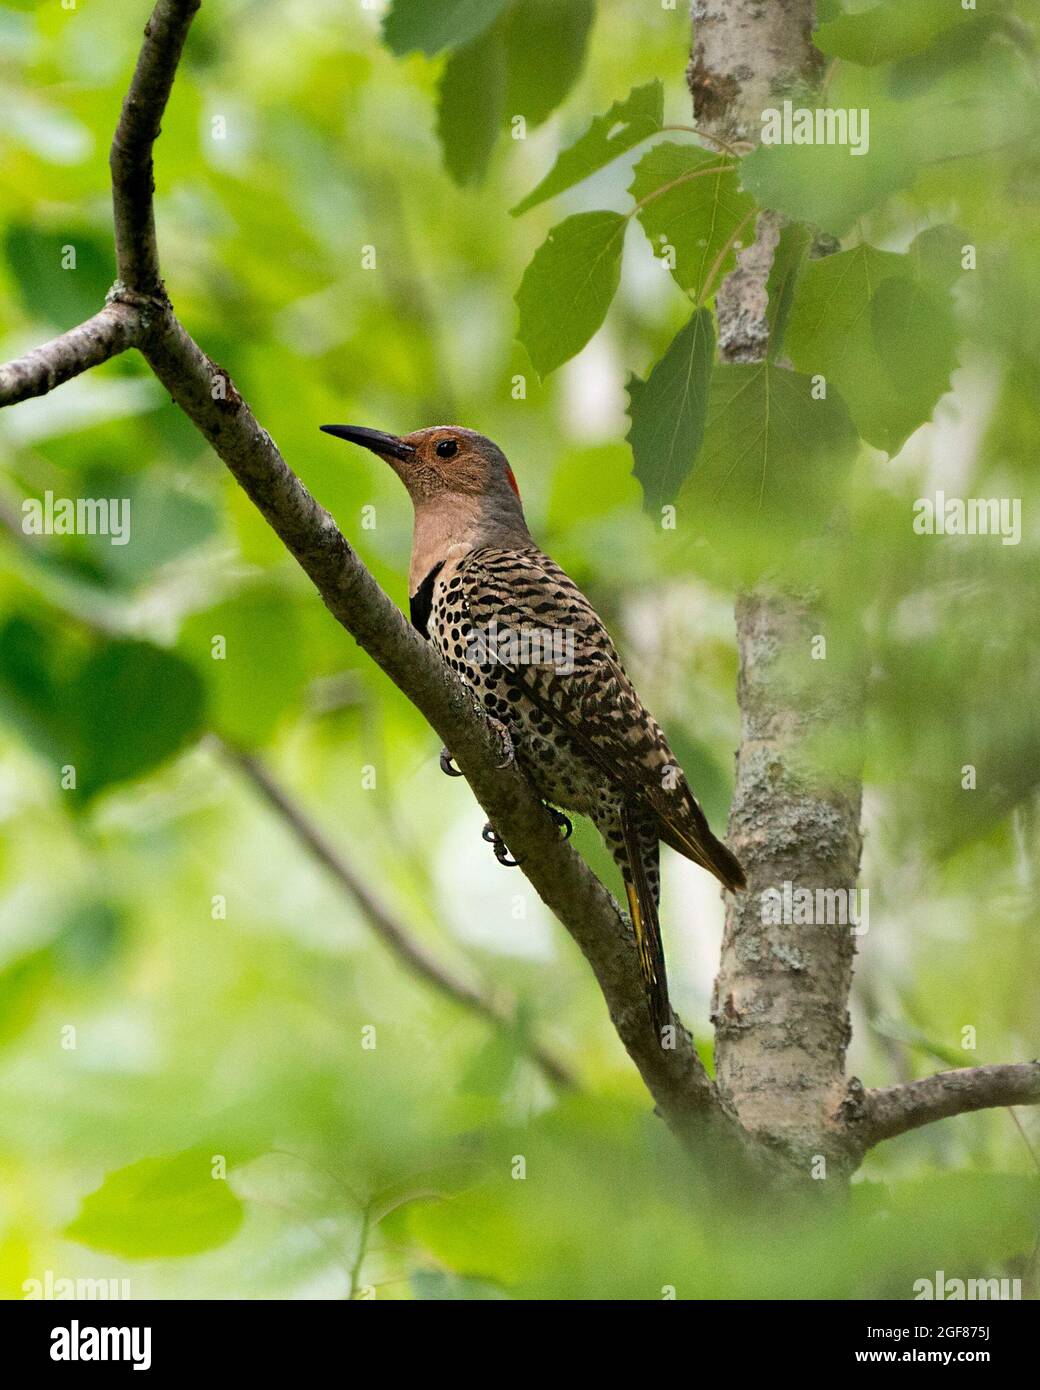 Northern Flicker female bird perched on a branch with green blur background in its environment and habitat surrounding during bird season mating. Stock Photo